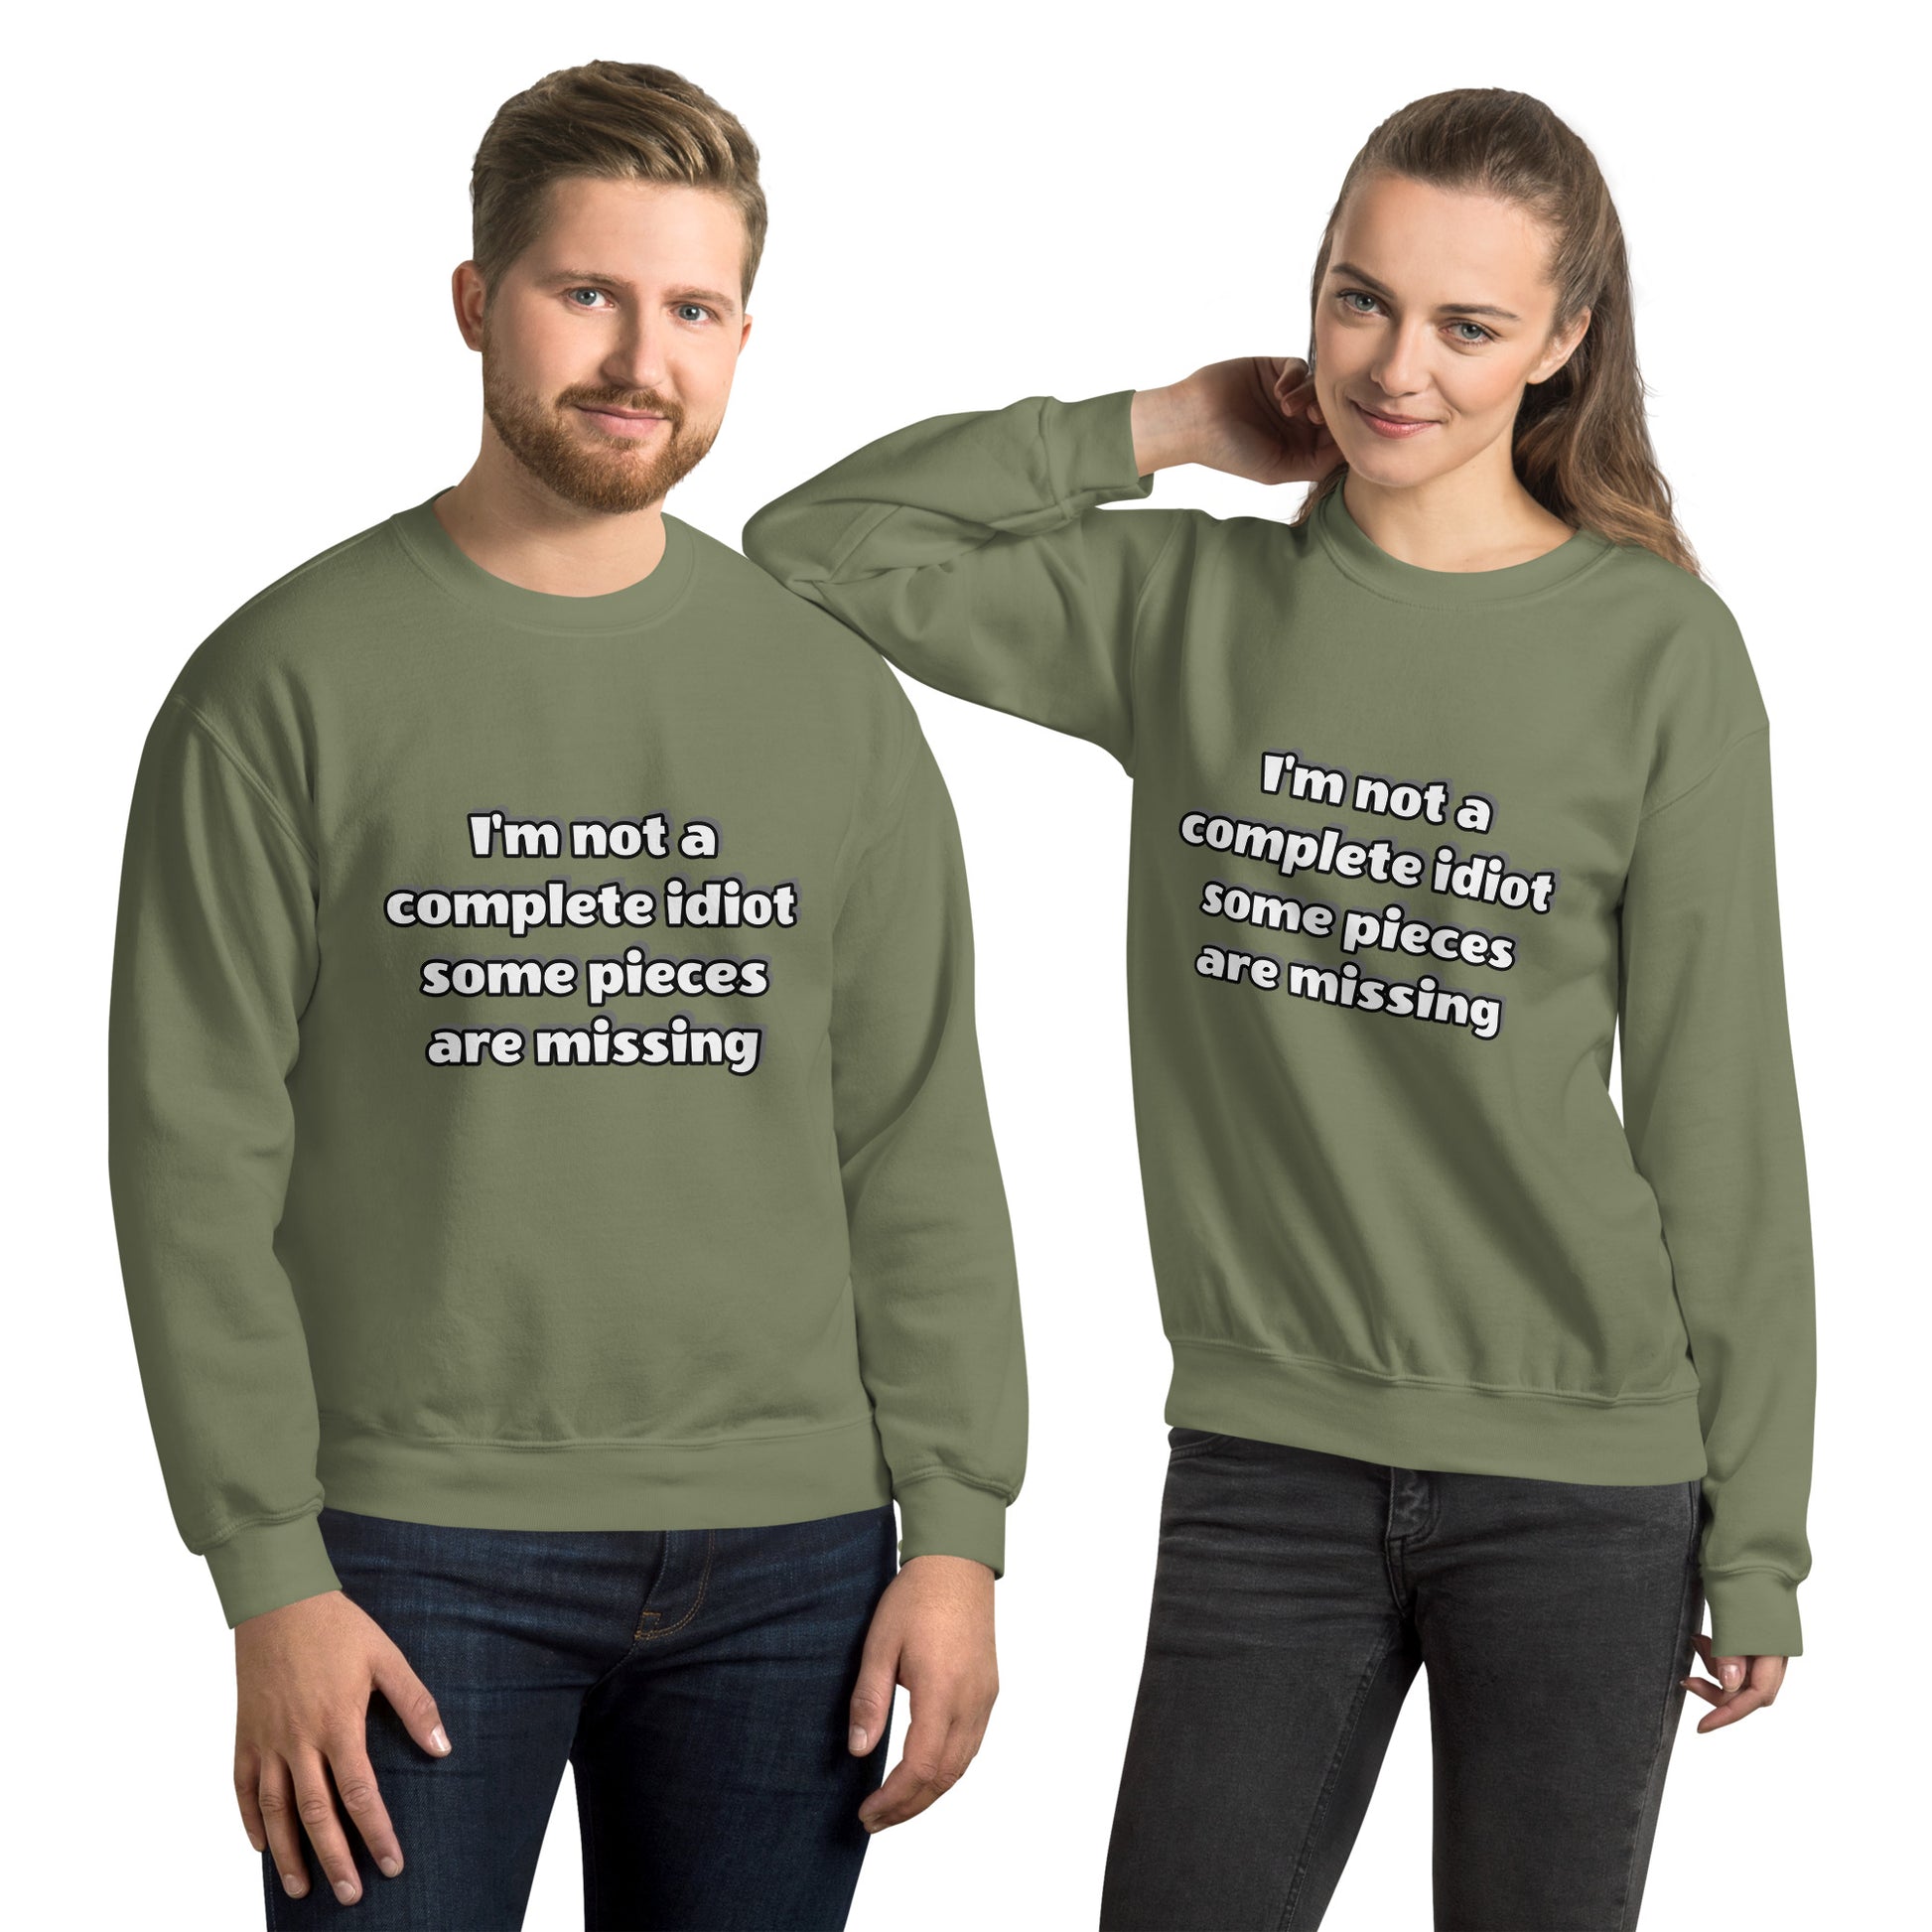 Man and women with military green sweatshirt with text “I’m not a complete idiot, some pieces are missing”